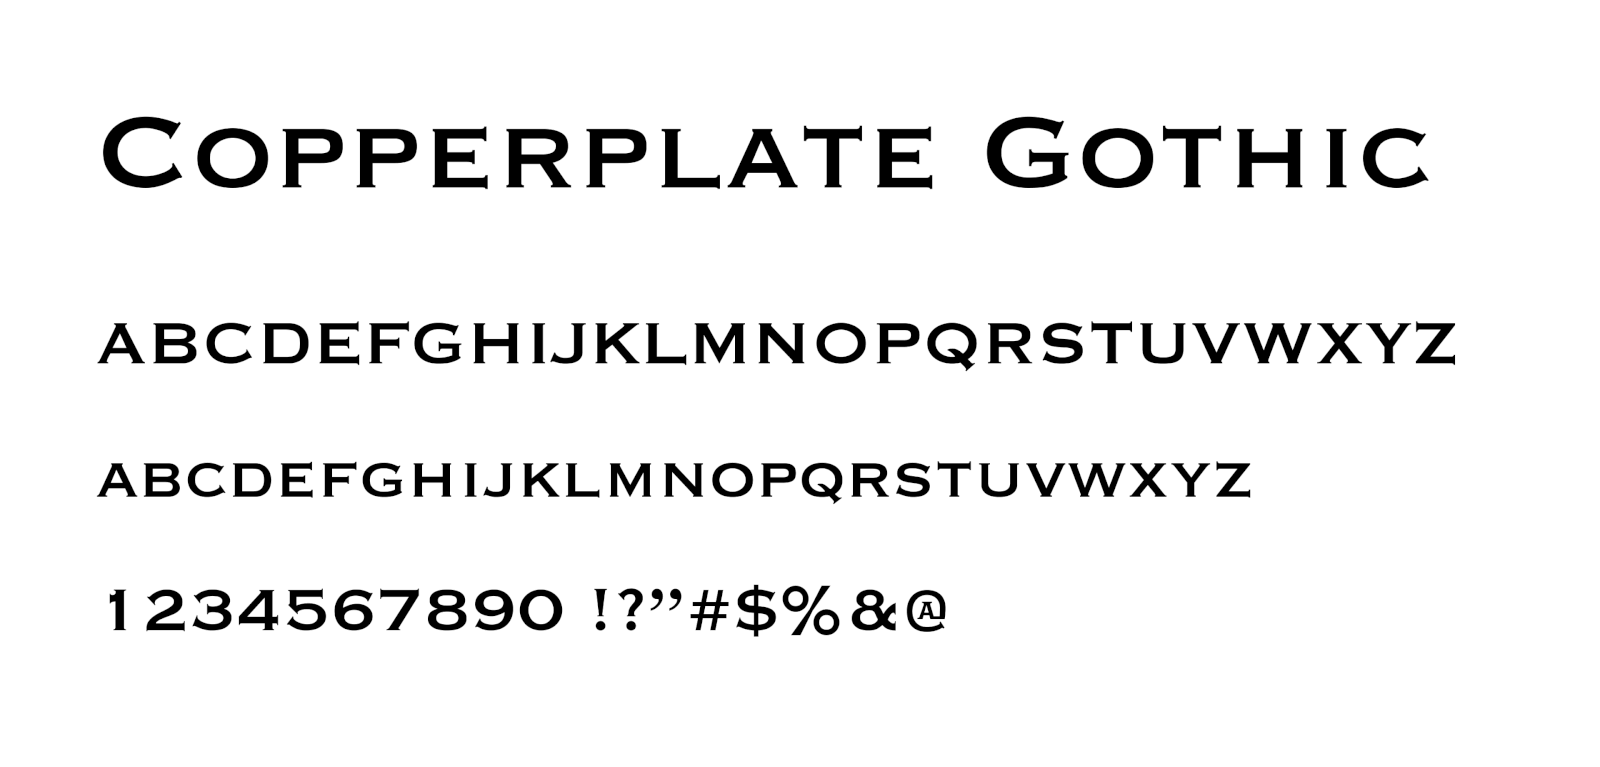 Copperplate Gothic（カッパープレートゴシック）フォント